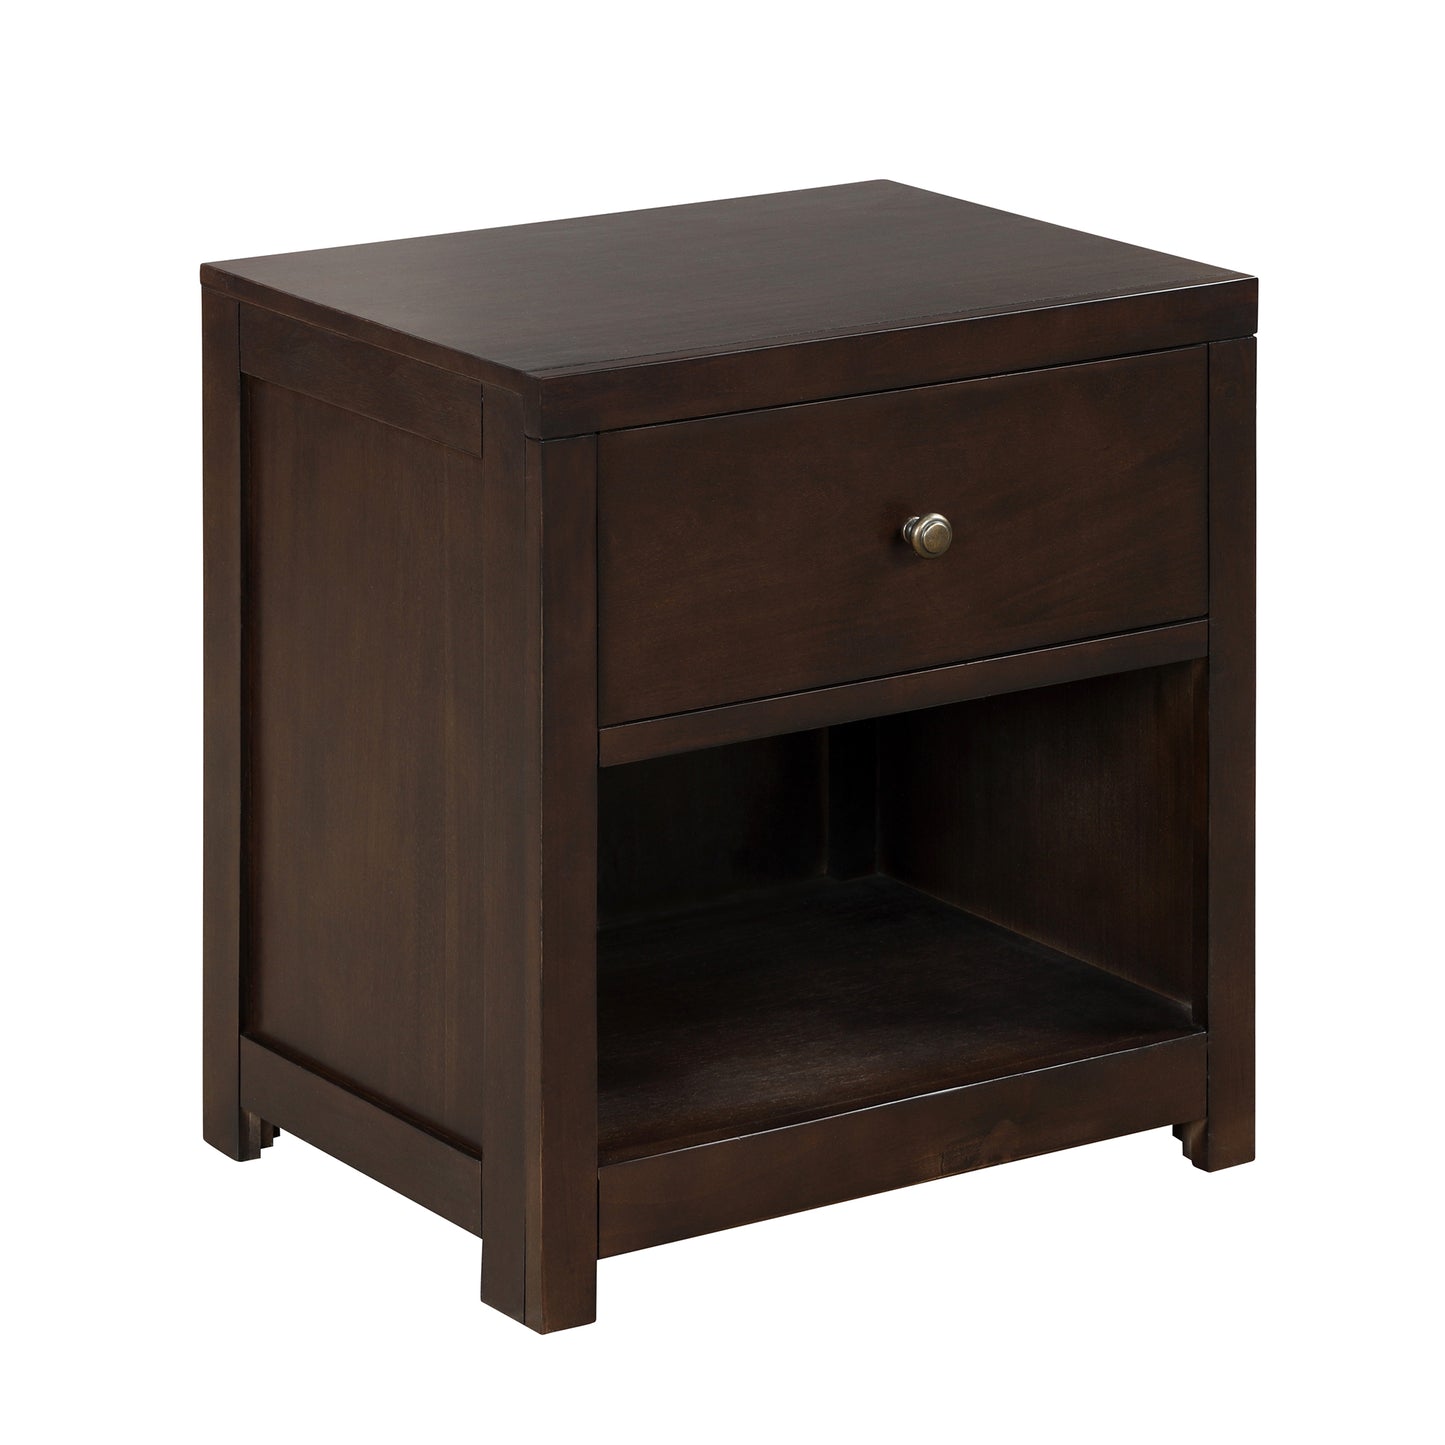 Vintage Aesthetic 1 Drawer Solid Wood Nightstand Sofa End Table  in Rich Brown (Nightstand of Freely Configurable Bedroom Sets)